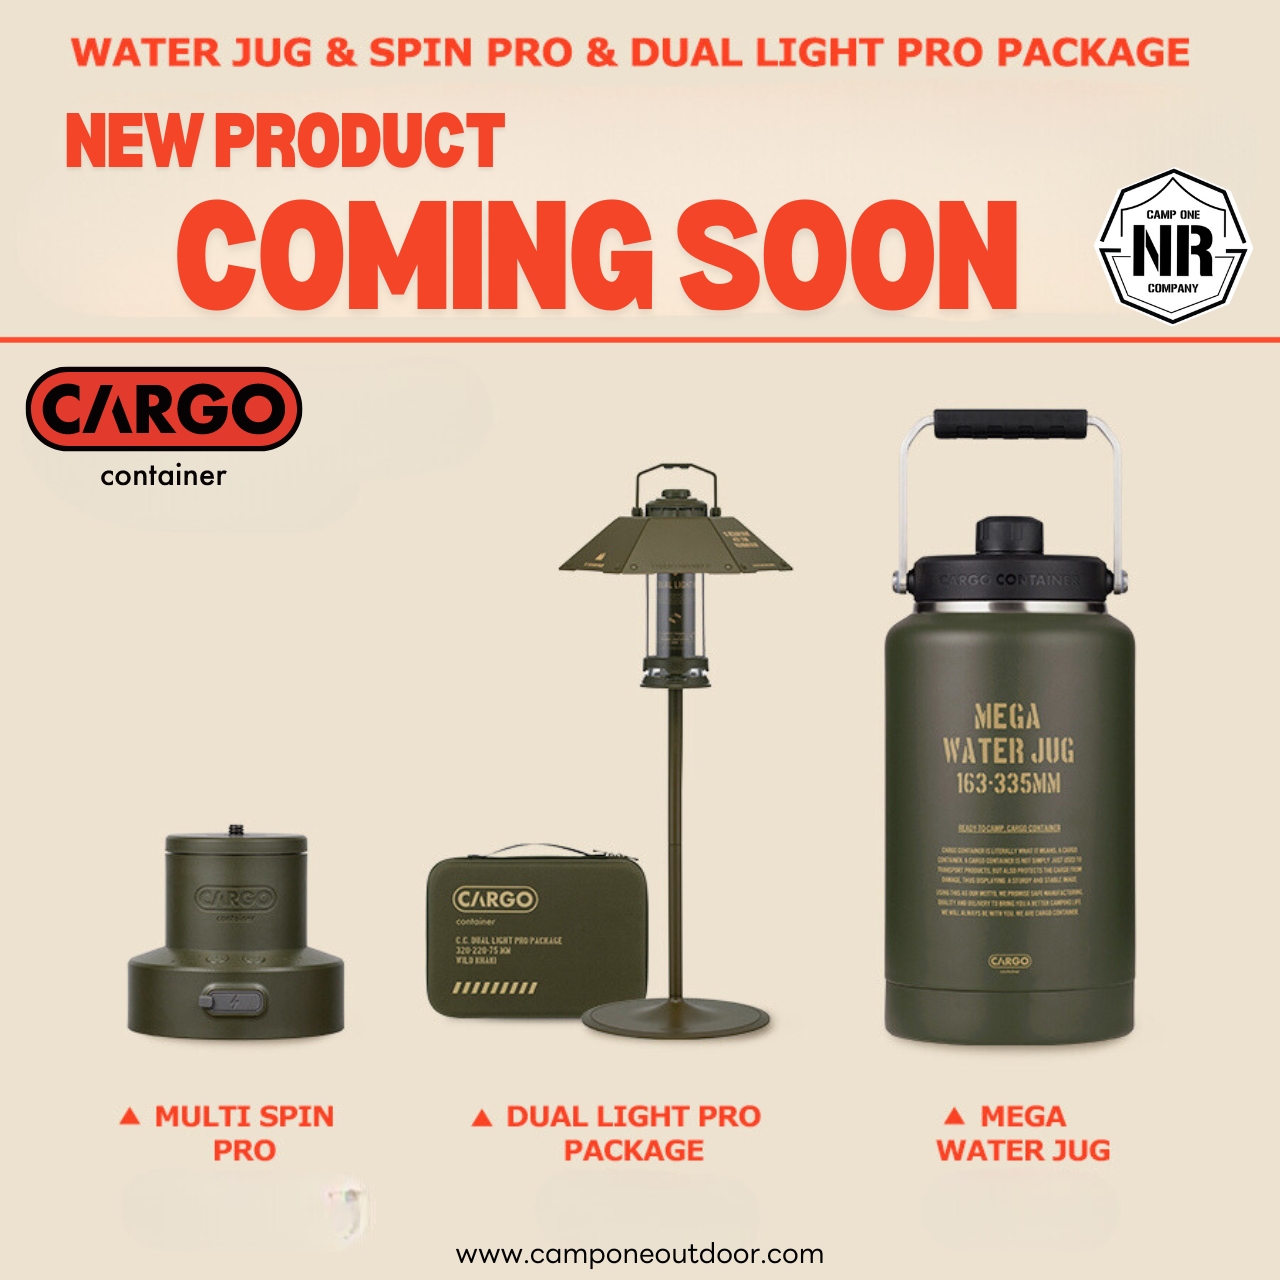 CARGO CONTAINER NEW PRODUCT COMING SOON